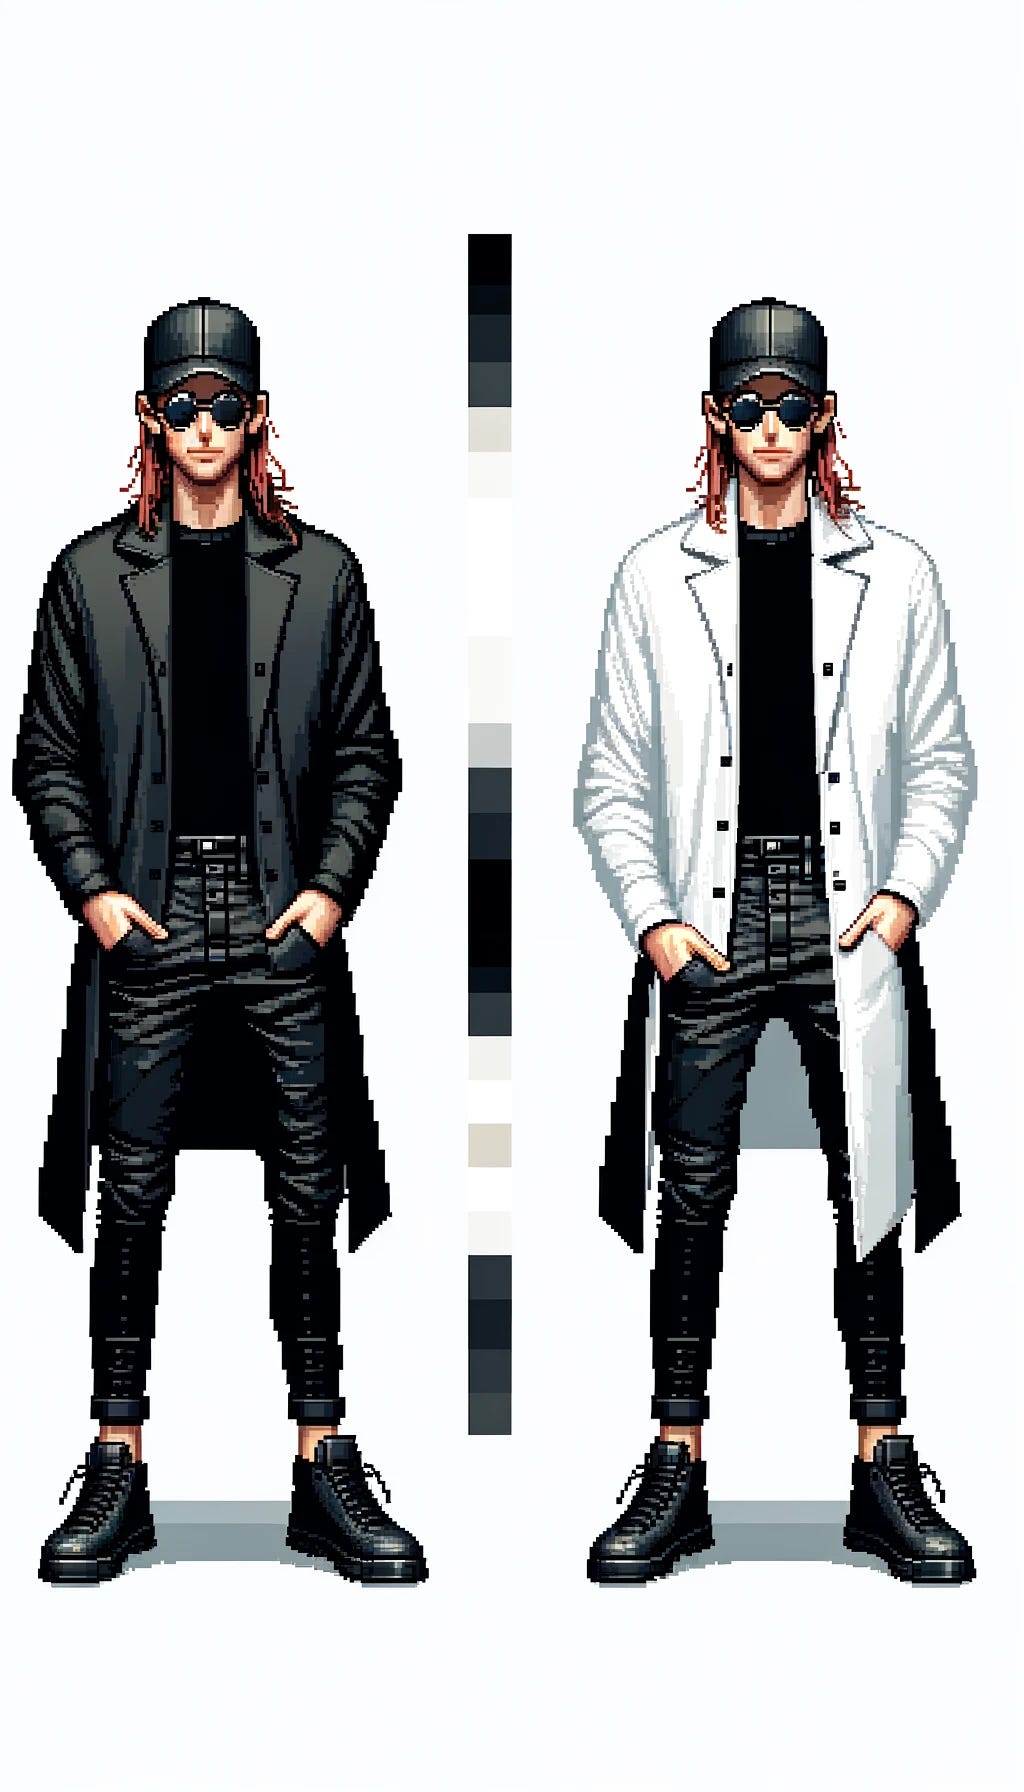 Adjust the character's image to feature a white coat while maintaining the rest of the outfit as is. The stylish man with a slender build has red-blonde long hair, prominent cheekbones, and a sharp jawline. He's adorned with a black leather baseball cap facing forward, dark movie star sunglasses, and a black pullover hooded sweatshirt. The outfit includes slim black jeans and all-black leather sneakers, inspired by a minimalist, luxury design. The key change is that the chore coat is now white, button-front, and cotton, providing a striking contrast to the rest of the monochromatic outfit. This updated character should still be set against a pure white background, presented in 16-bit pixel art style to capture the aesthetic of an SNK Neo Geo video game cutscene.